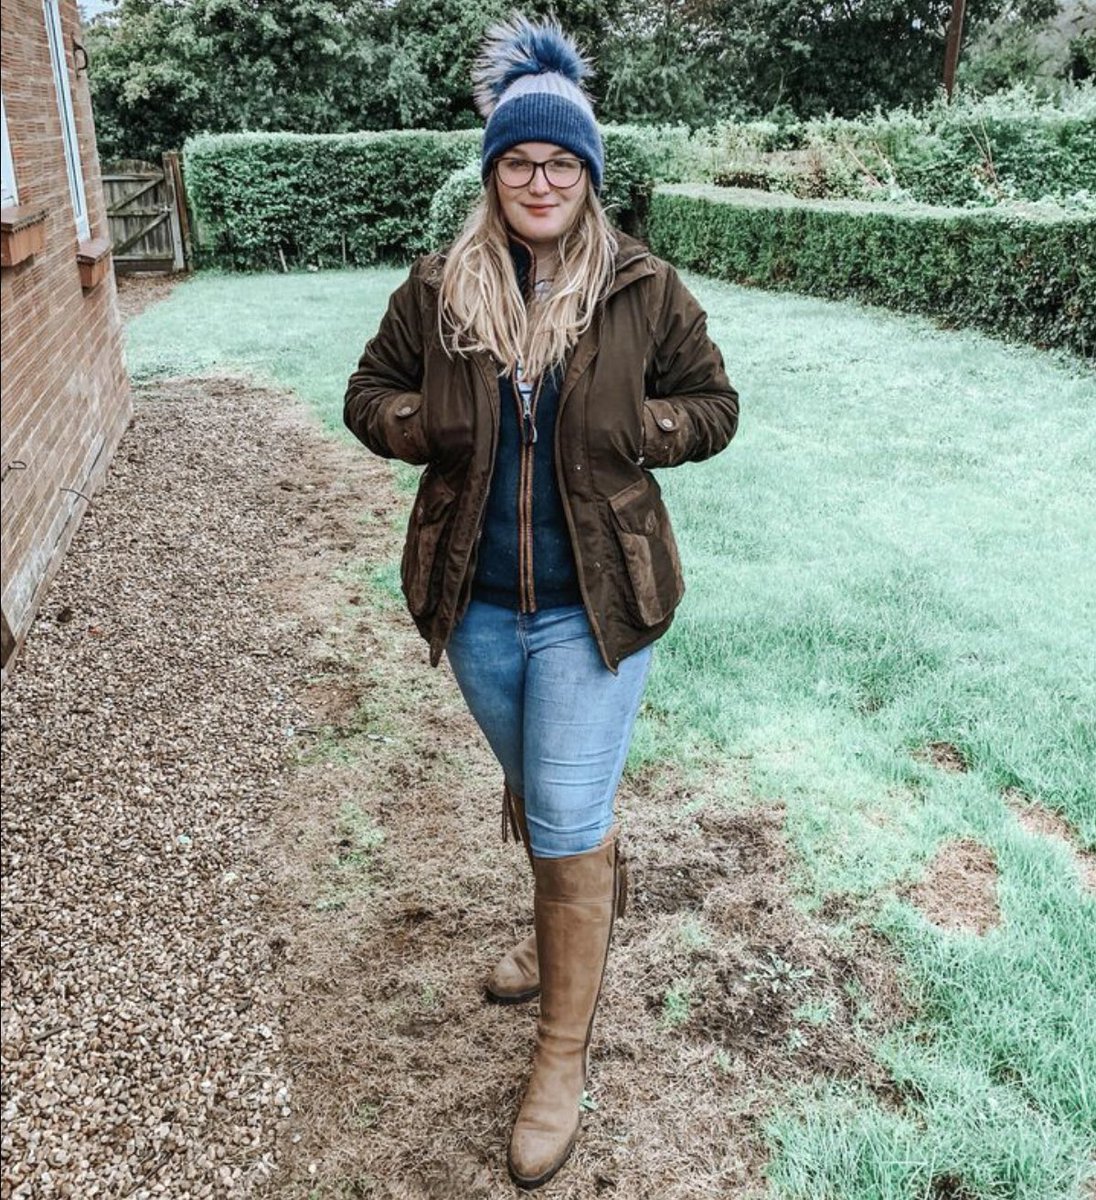 The weather seem a little confused, but don’t worry we’ve got you covered! ❄️

Thank you @anorfolklifestyle for sharing your photo

#wearesherwoodforest #countryclothing